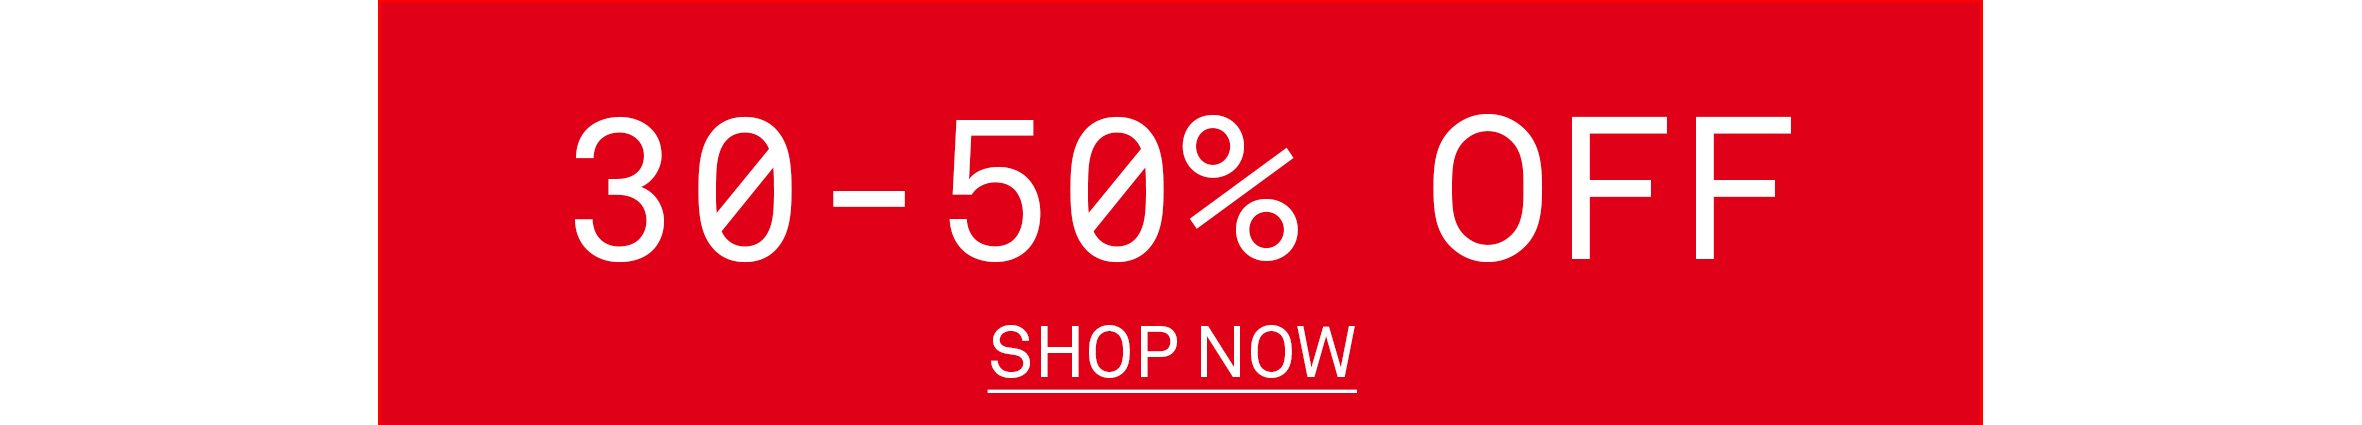 30 TO 50% OFF